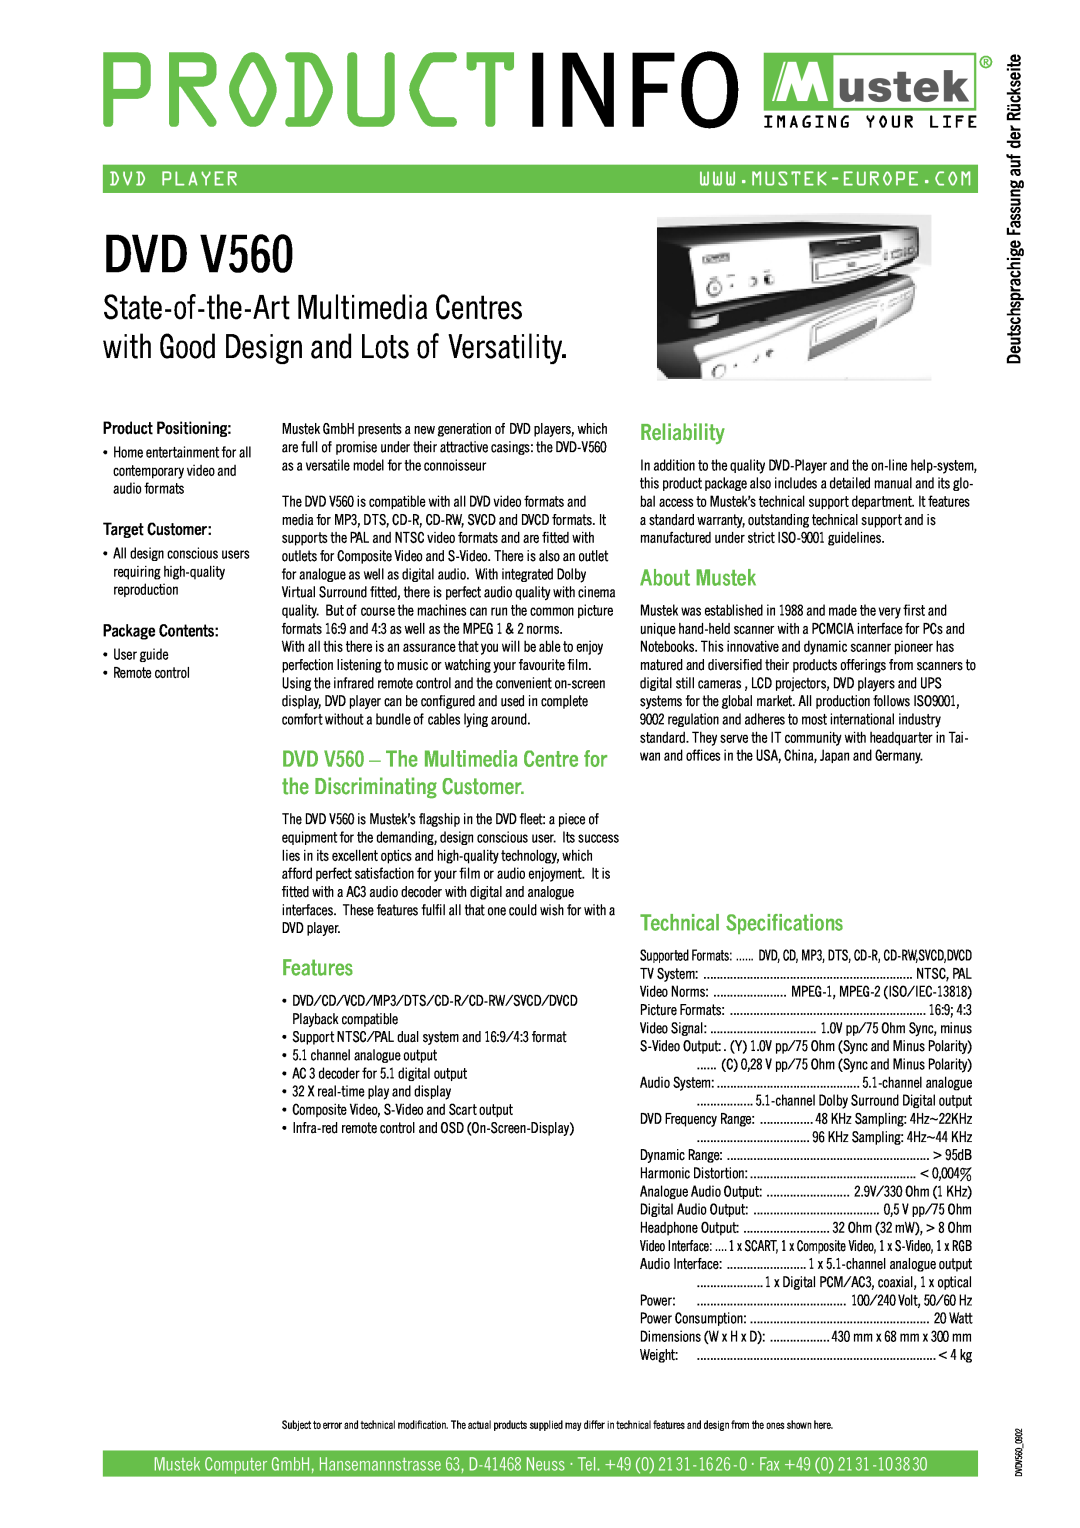 Mustek V560 technical specifications Features, Reliability, About Mustek, Technical Specifications, Dvd Player 